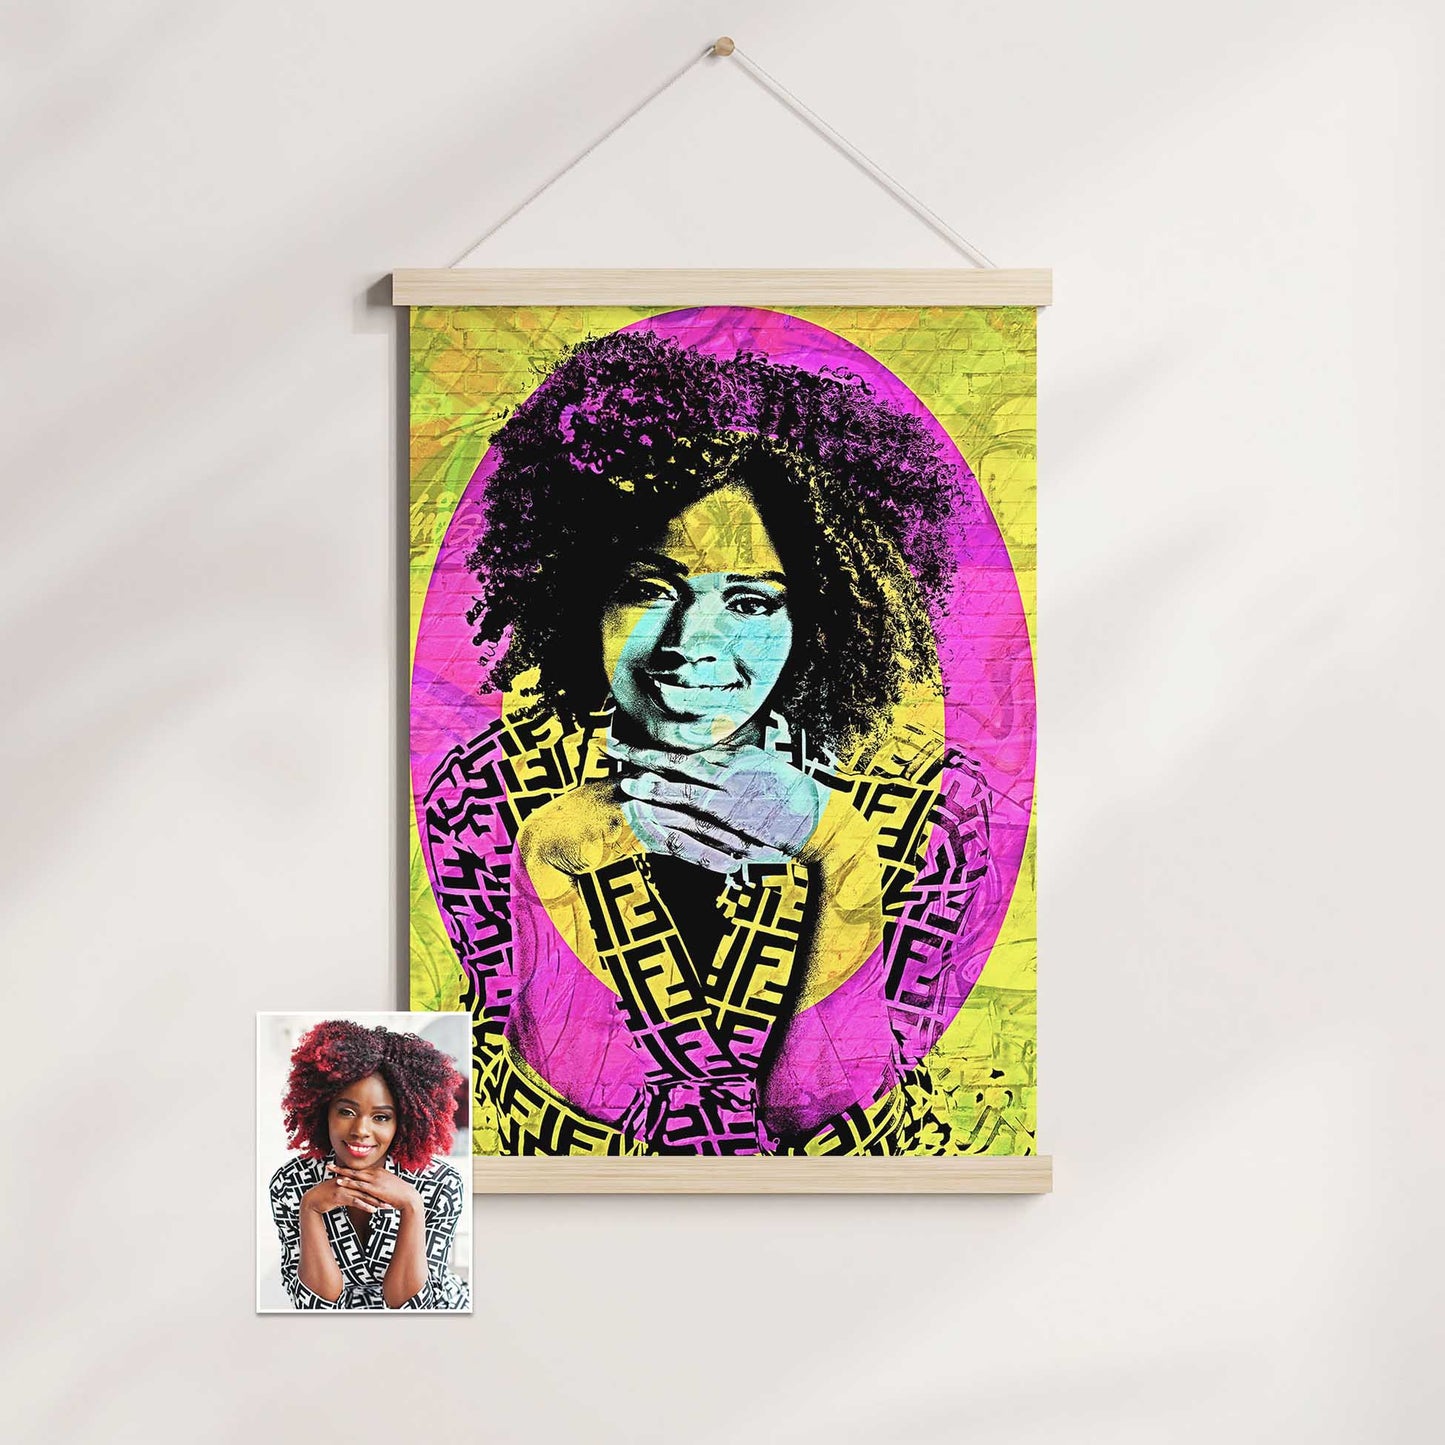 Experience the joy and creativity of the Personalised Graffiti Street Art Poster Hanger. Its cool graffiti style and street art filter bring a unique and vibrant atmosphere to your space. Made with high-quality materials